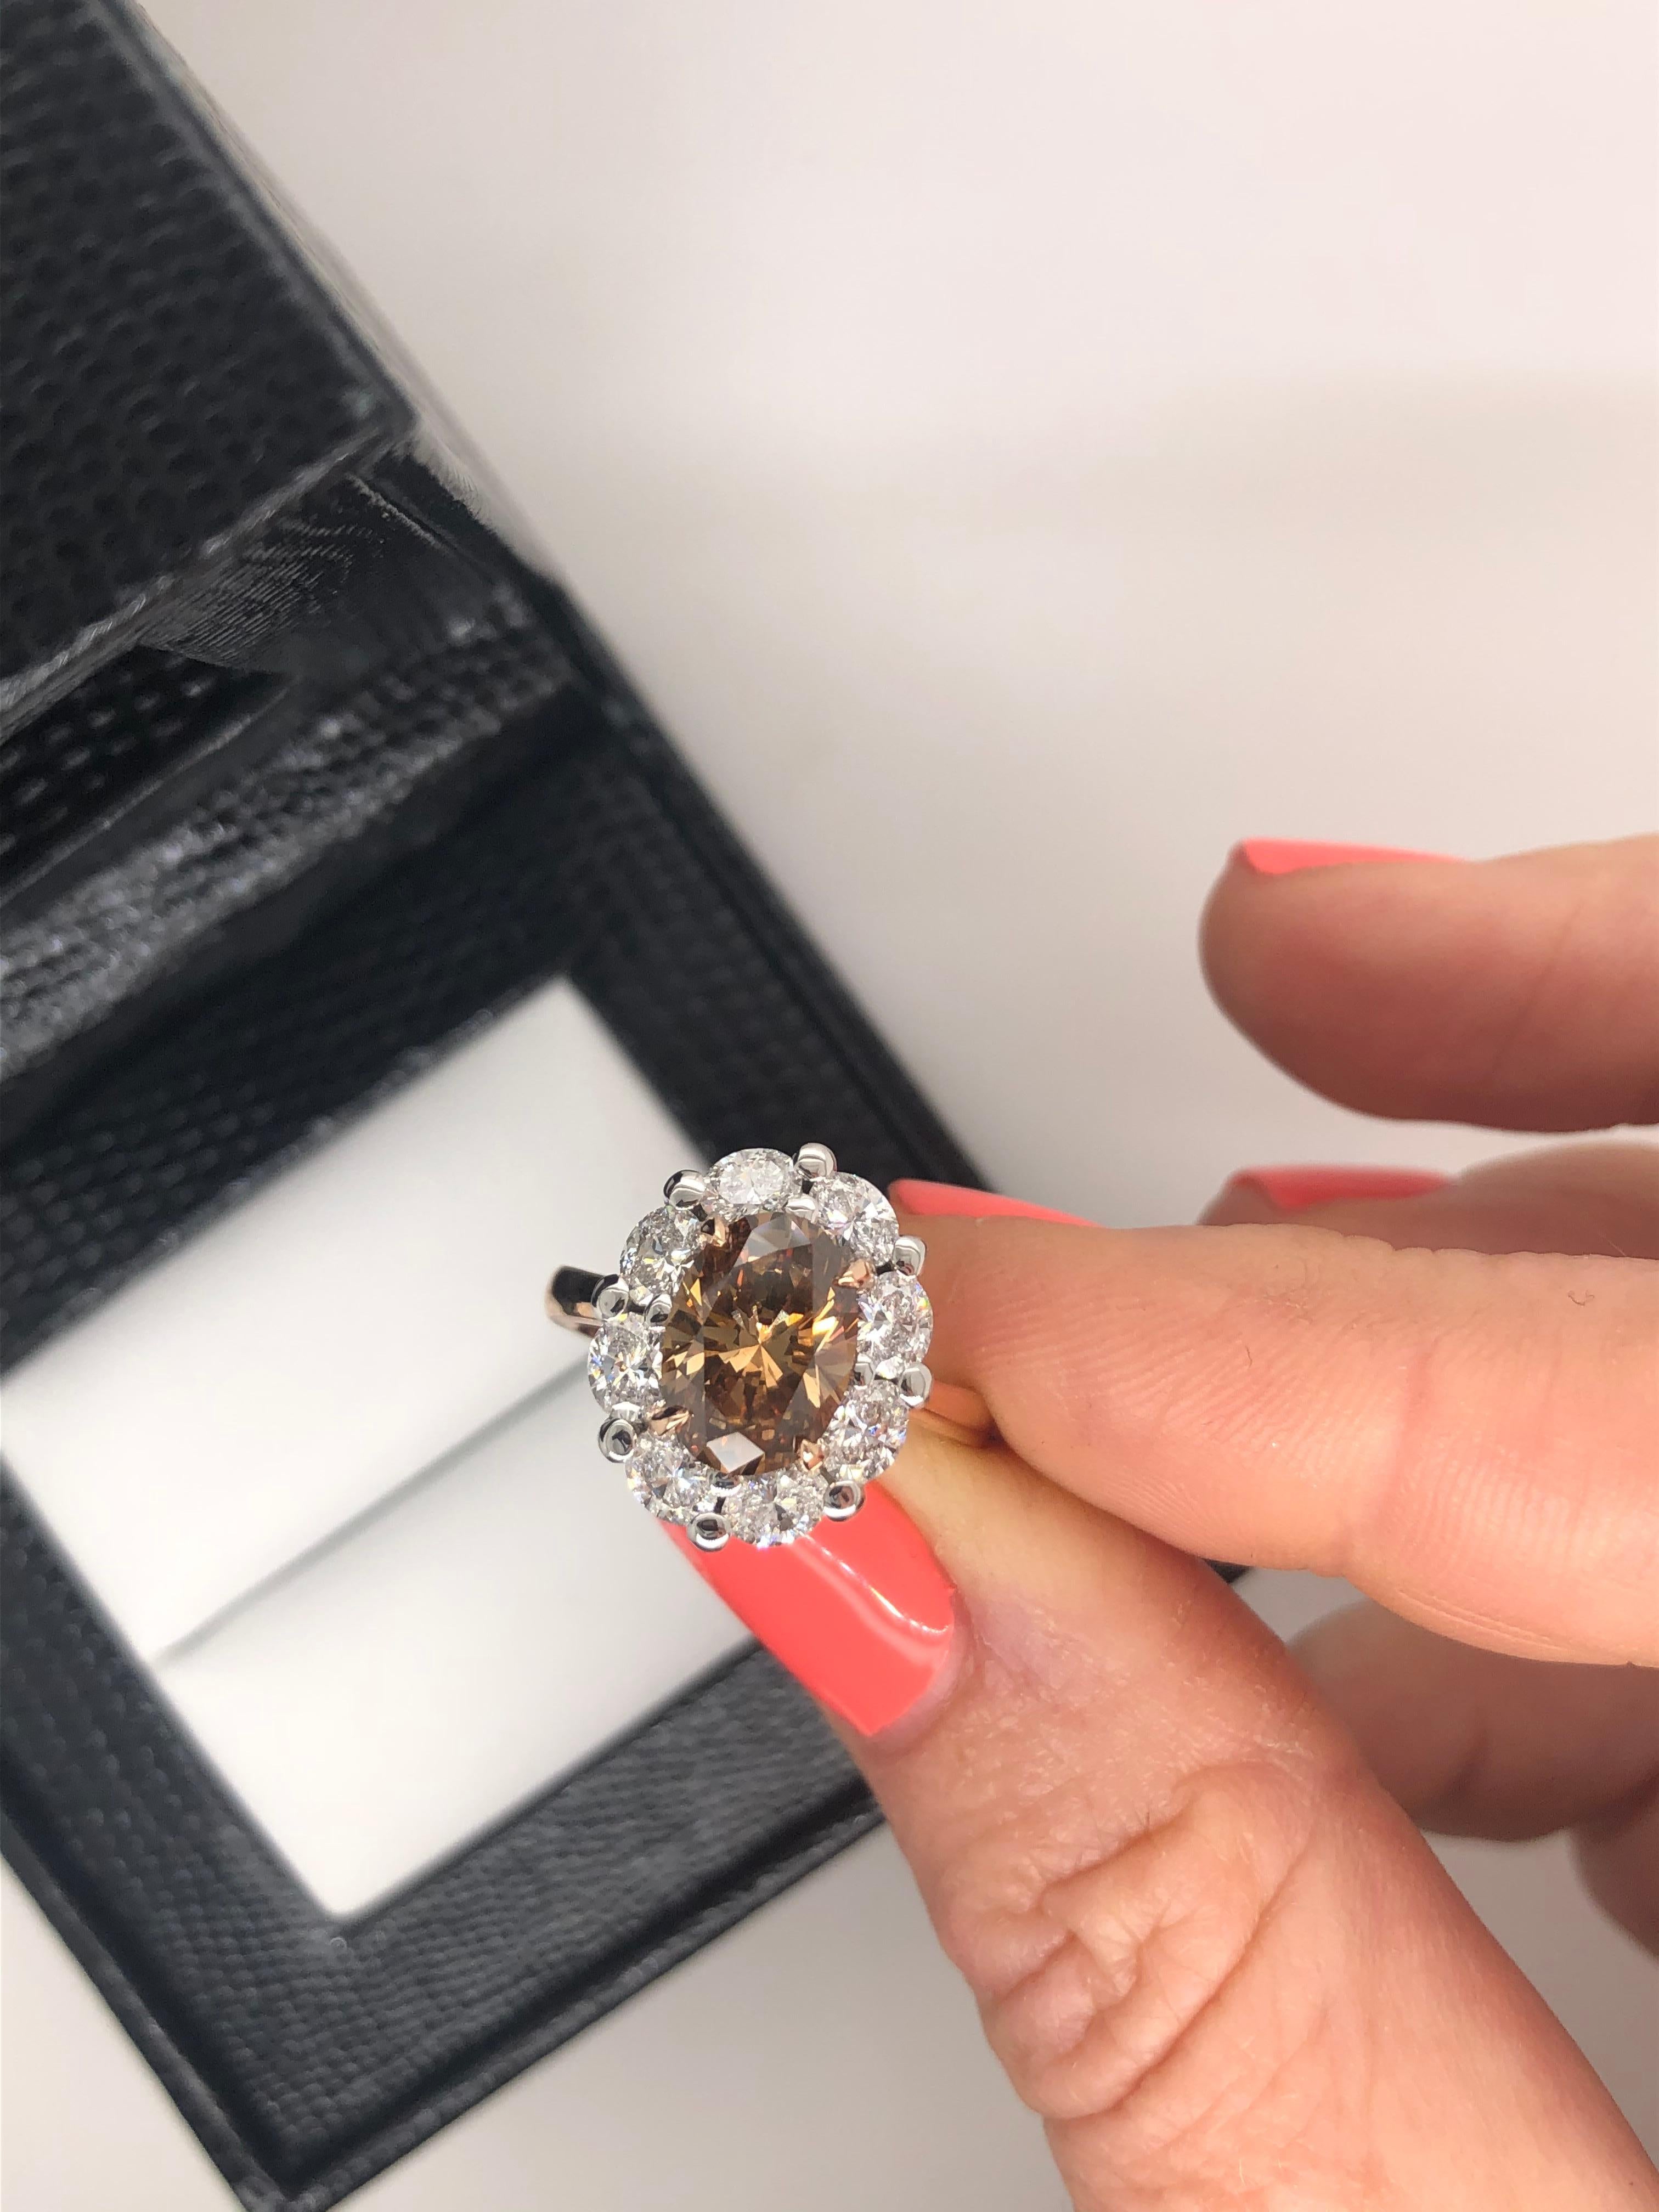 Exceptional Hand Crafted, 18ct rose and white gold Australian Argyle Cognac Diamond ring.
The Central Oval 2.03ct, Argyle 'Fancy Deep Orangy Brown' diamond as per Origin Report # RTARG101425  is set in rose gold talon claws and surrounded by 8 Oval